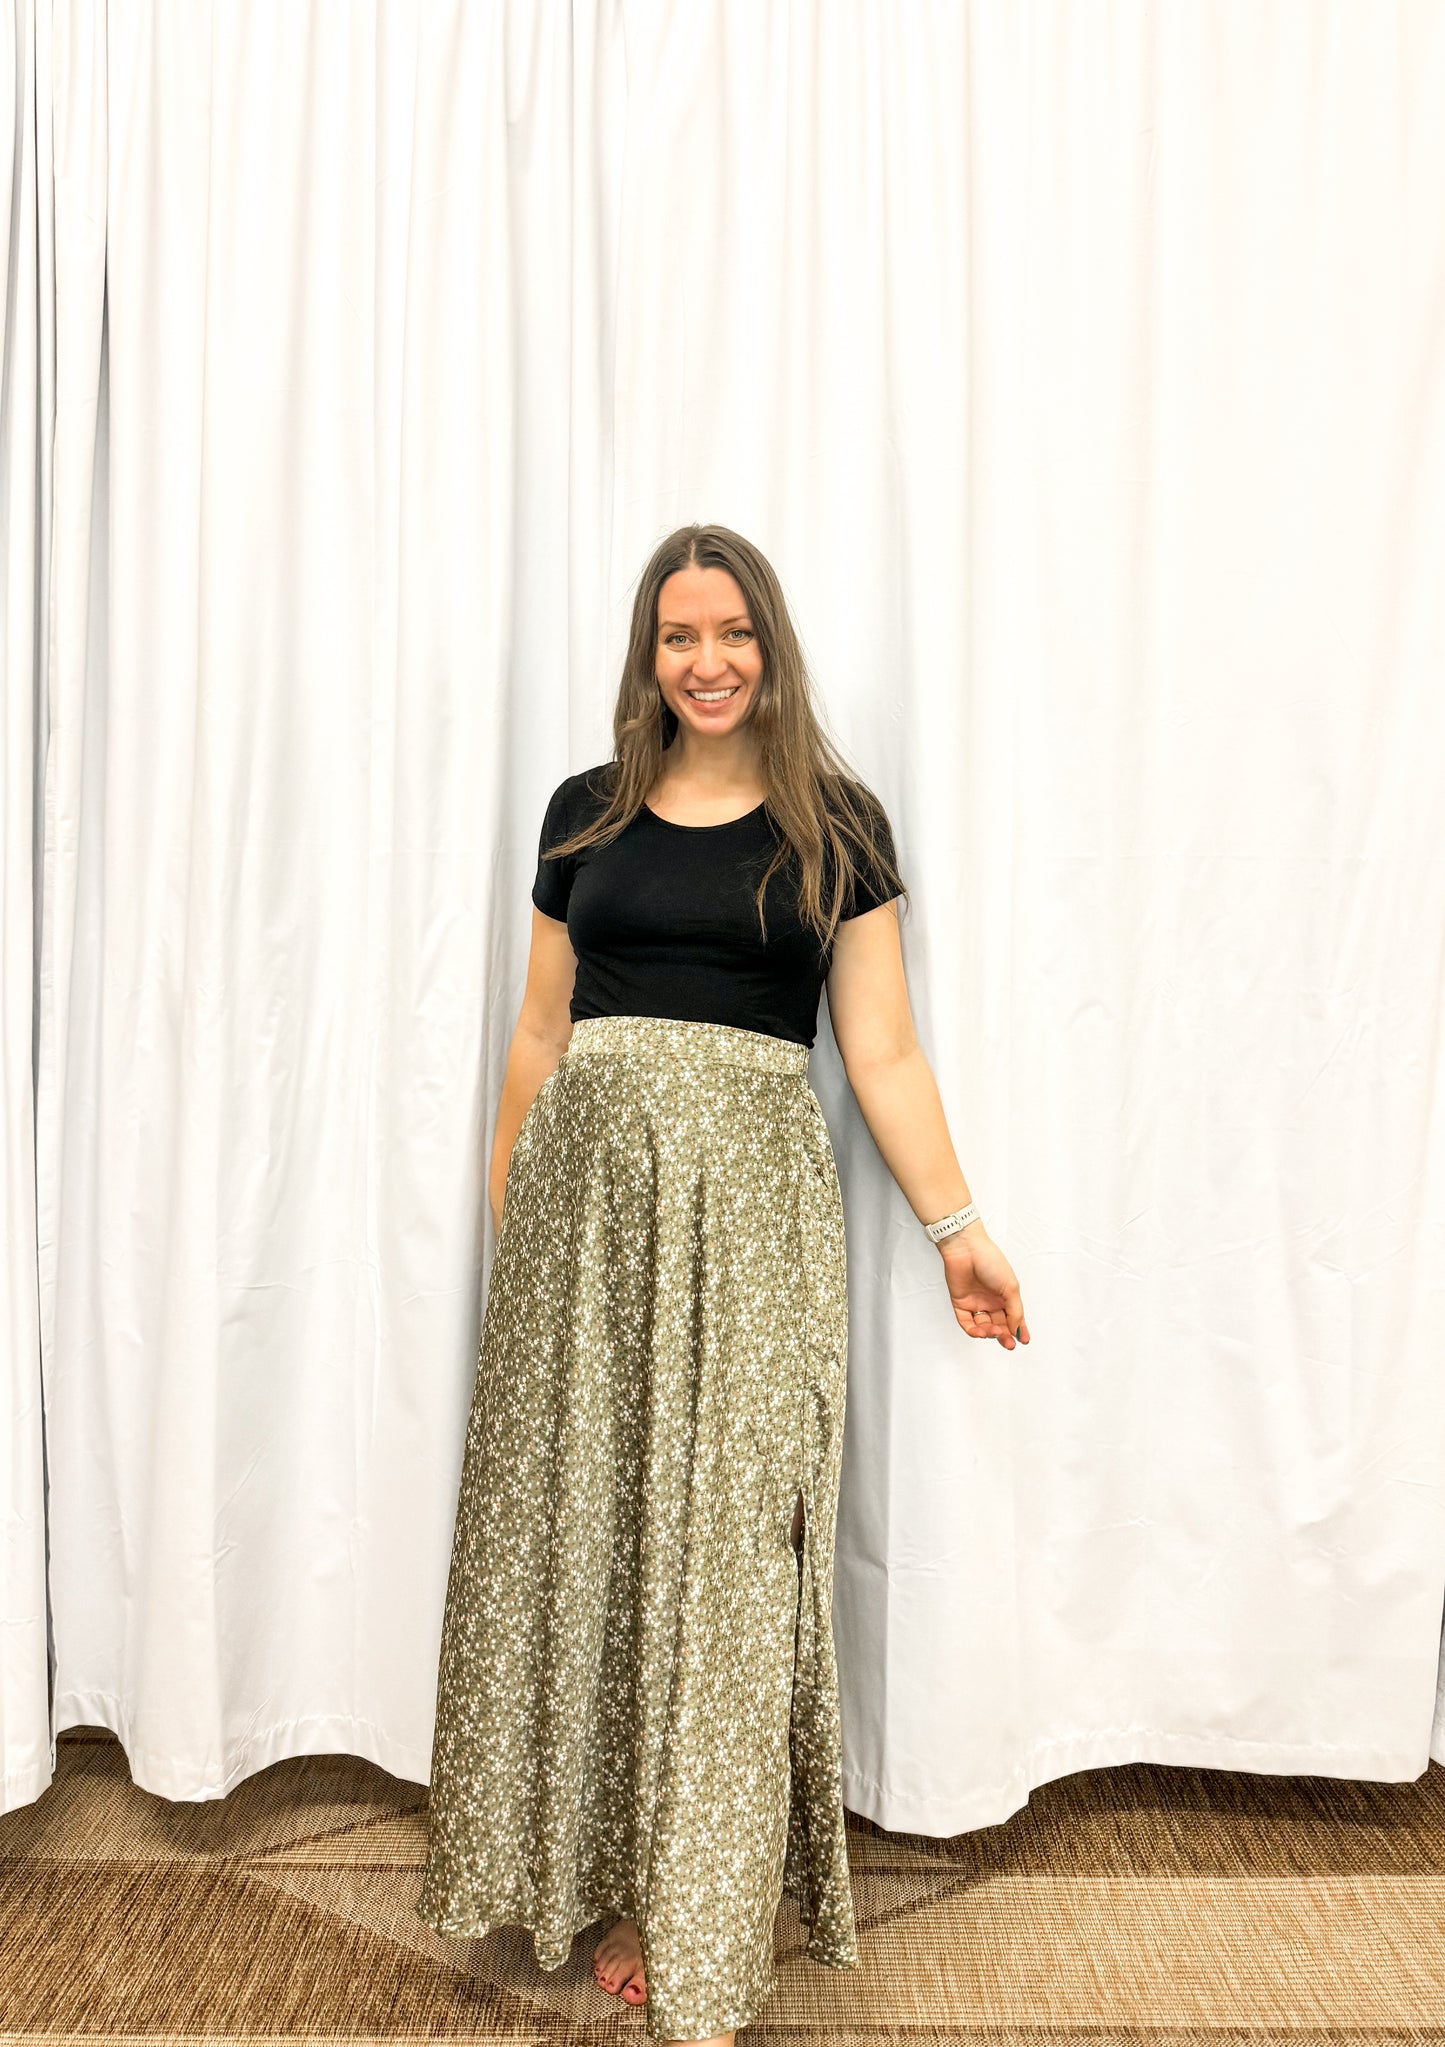 Olive Floral Stretch Satin Flare Maxi Skirt